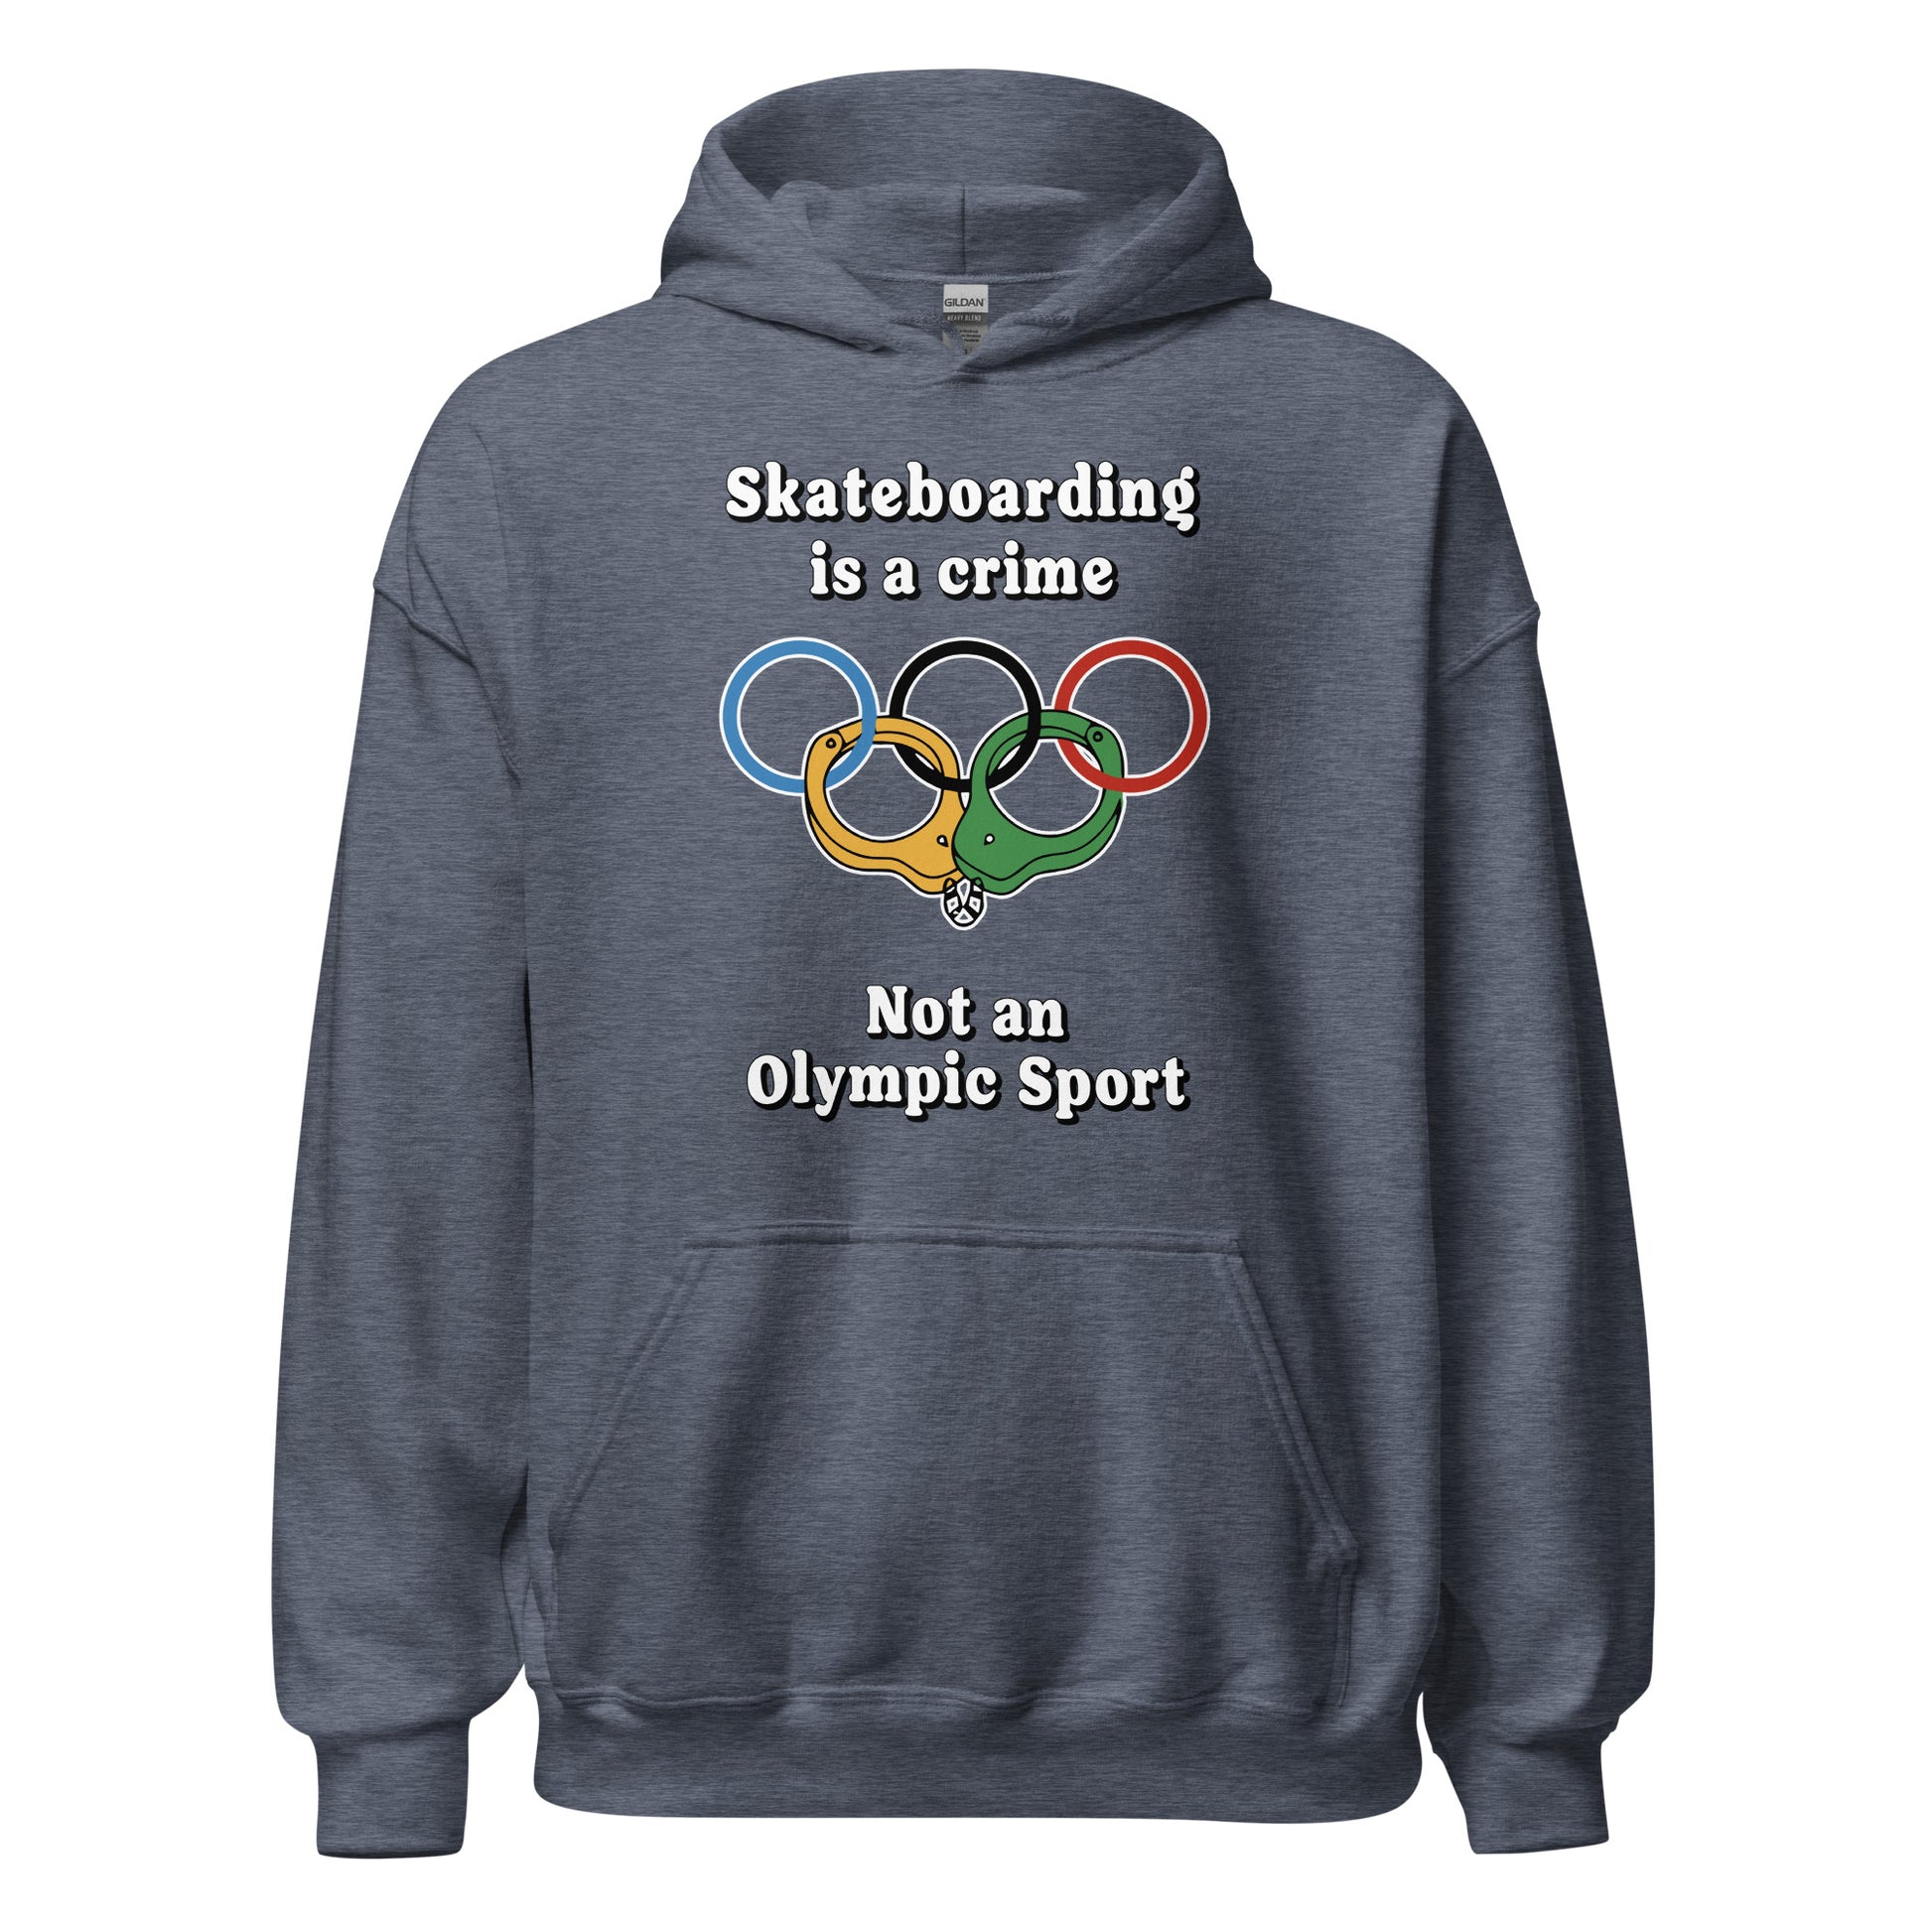 Skateboarding is a crime not an olympic sport design printed on a hoodie by Whistler Shirts